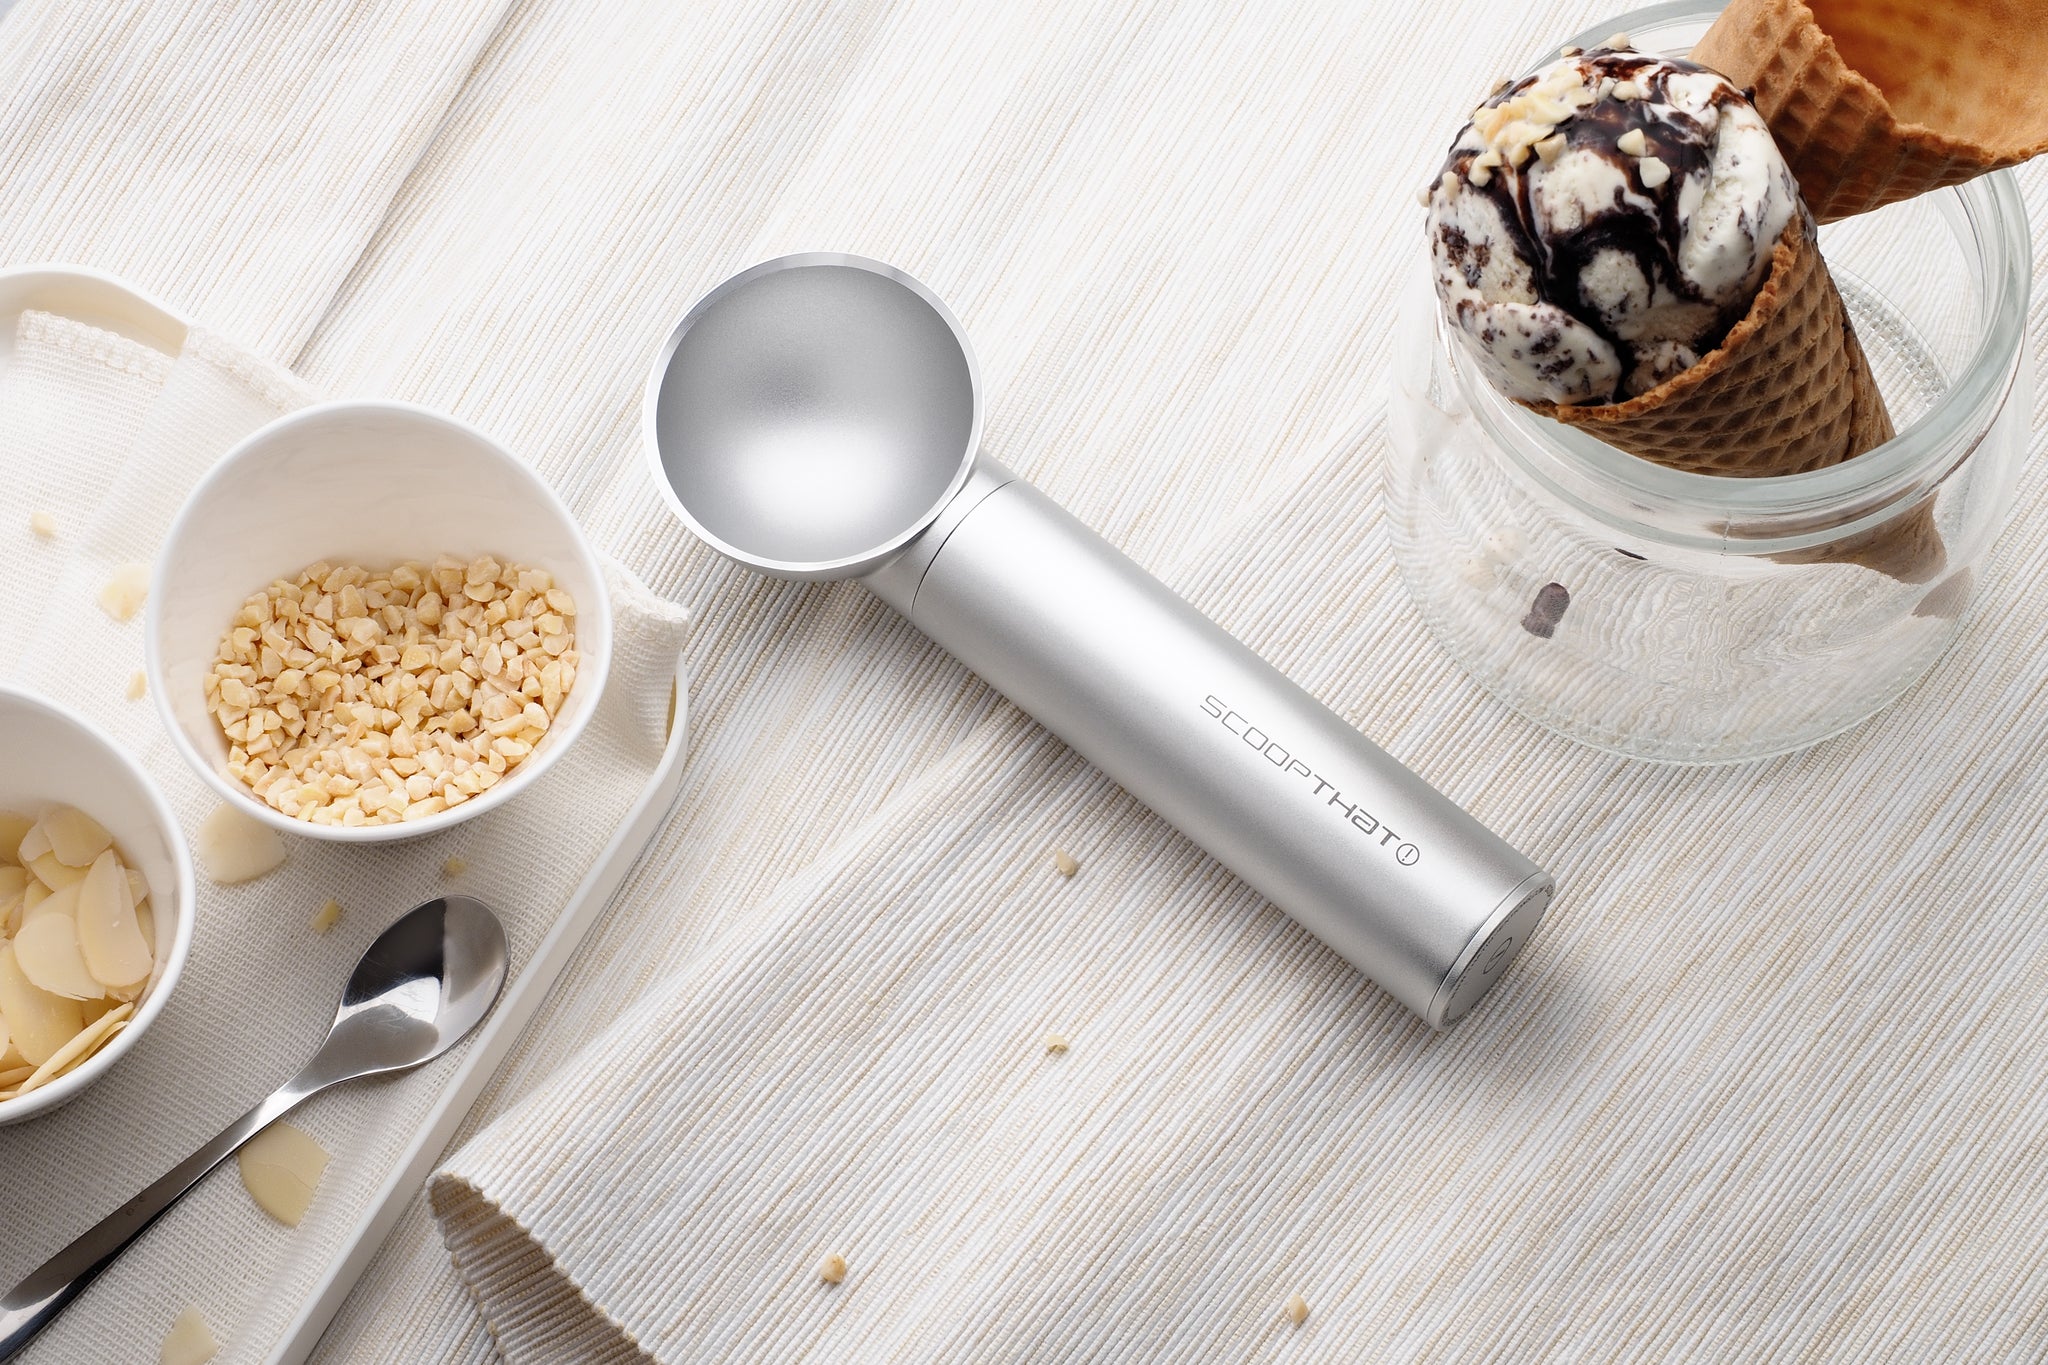 This warming ice cream scoop is now bigger than ever